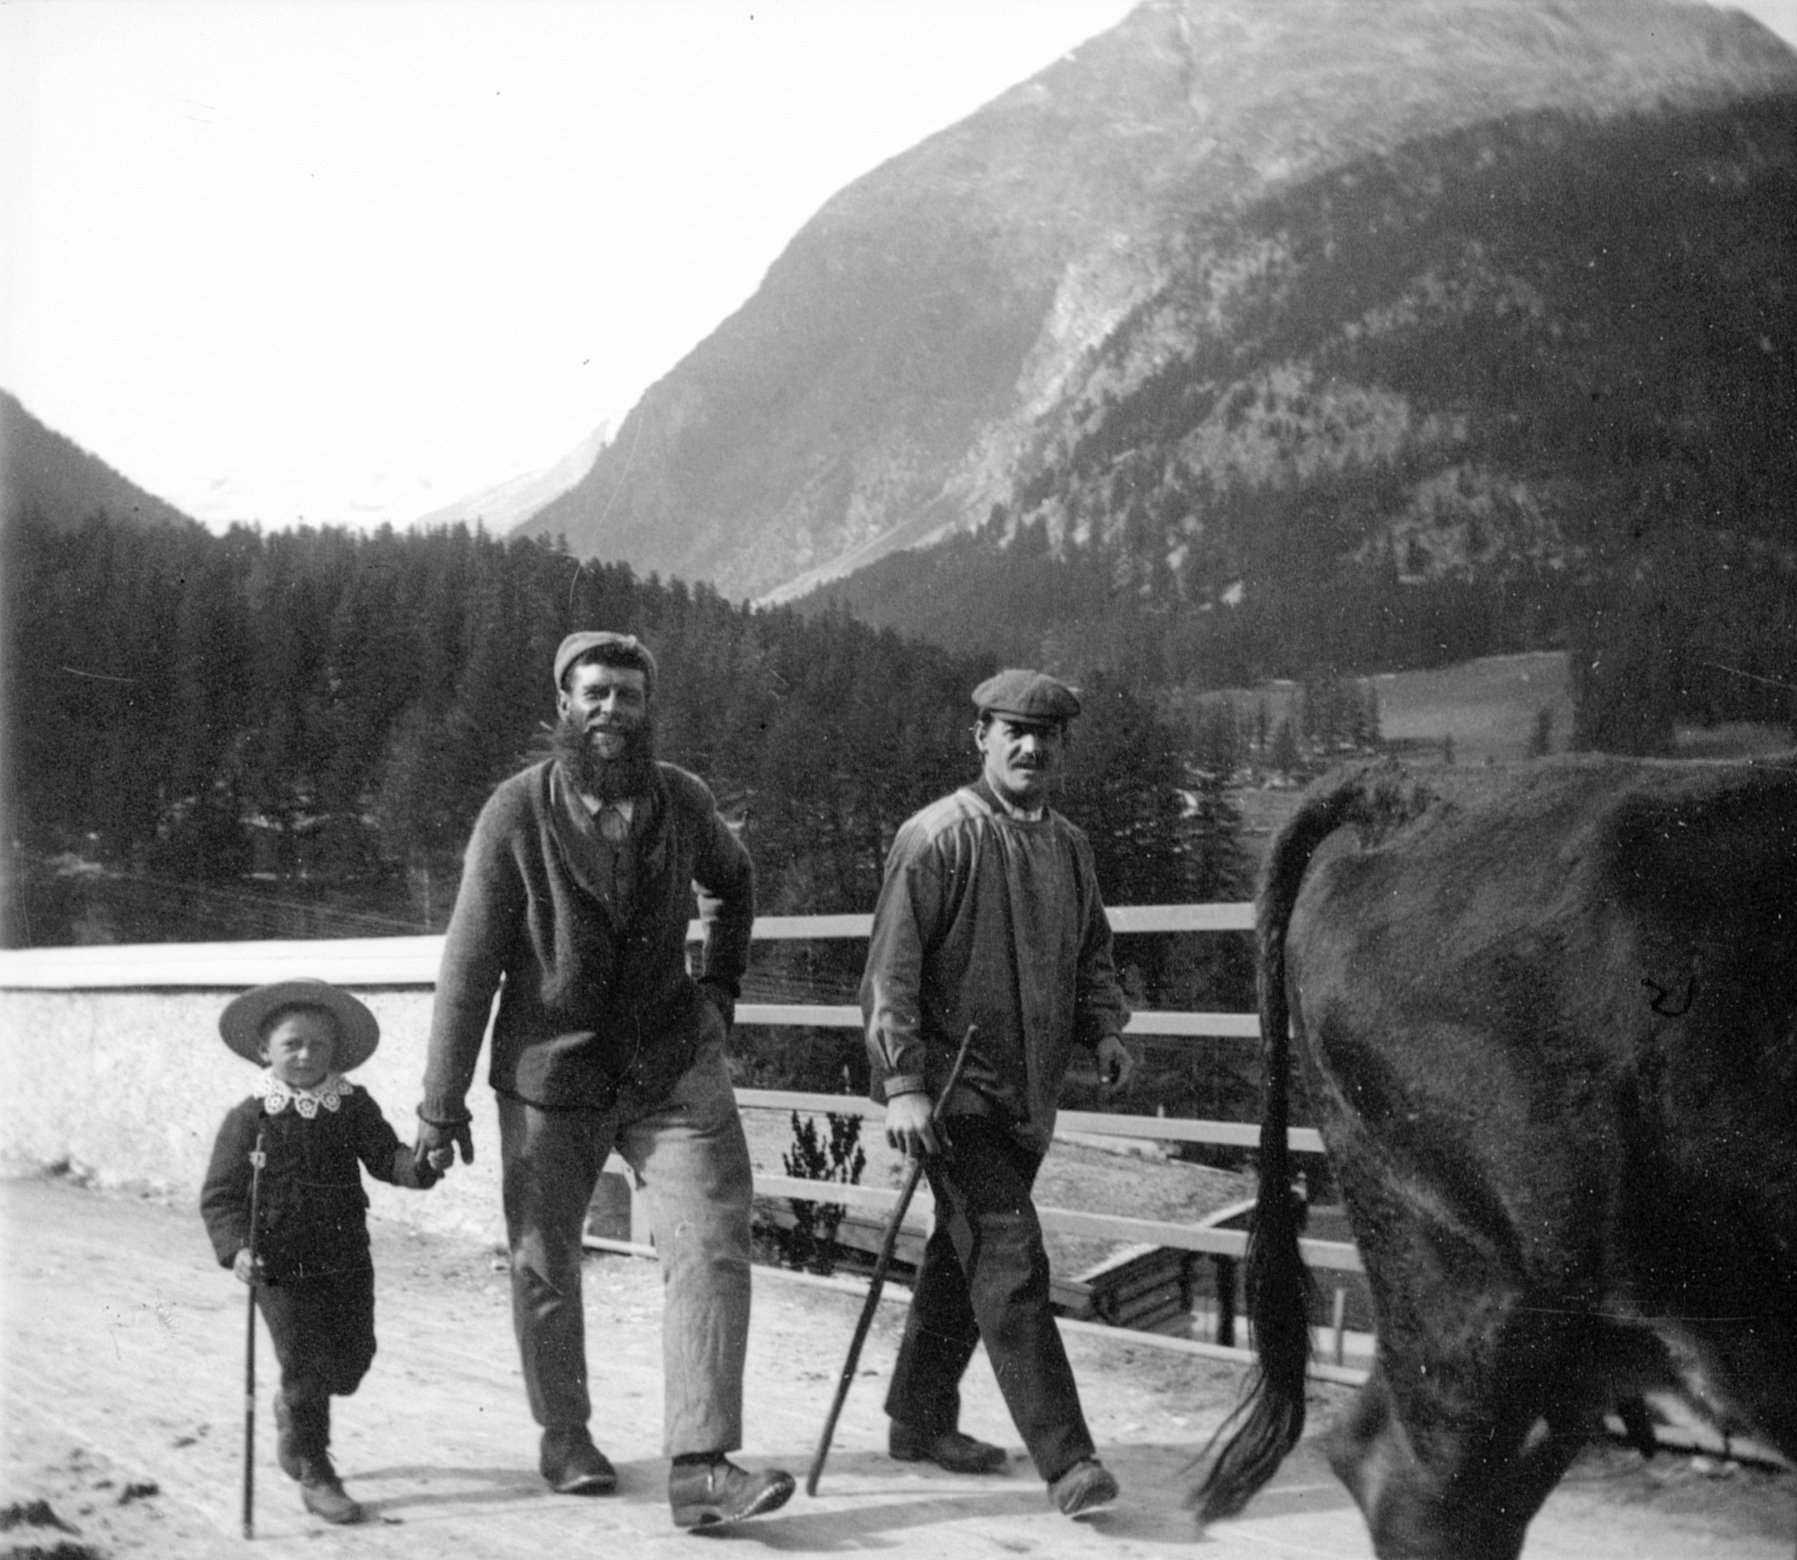 Bauern in Pontresina (Sommer 1902), 87237 sn L_o (DRM CC BY-NC-SA)